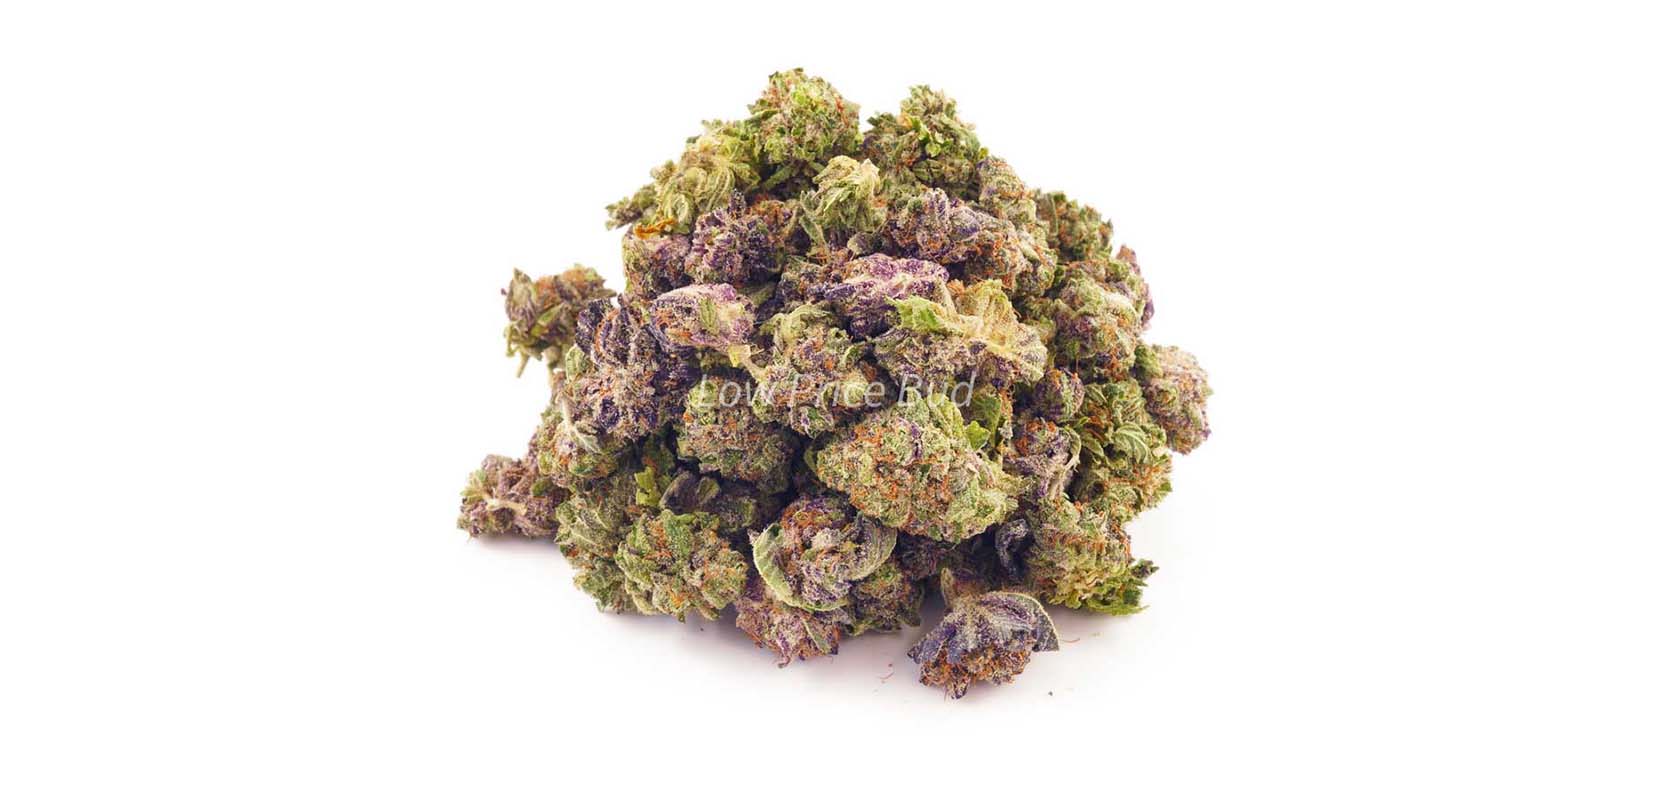 Purple Punch weed online Canada from Low Price Bud weed store and online dispensary for value buds. dispensary weed.